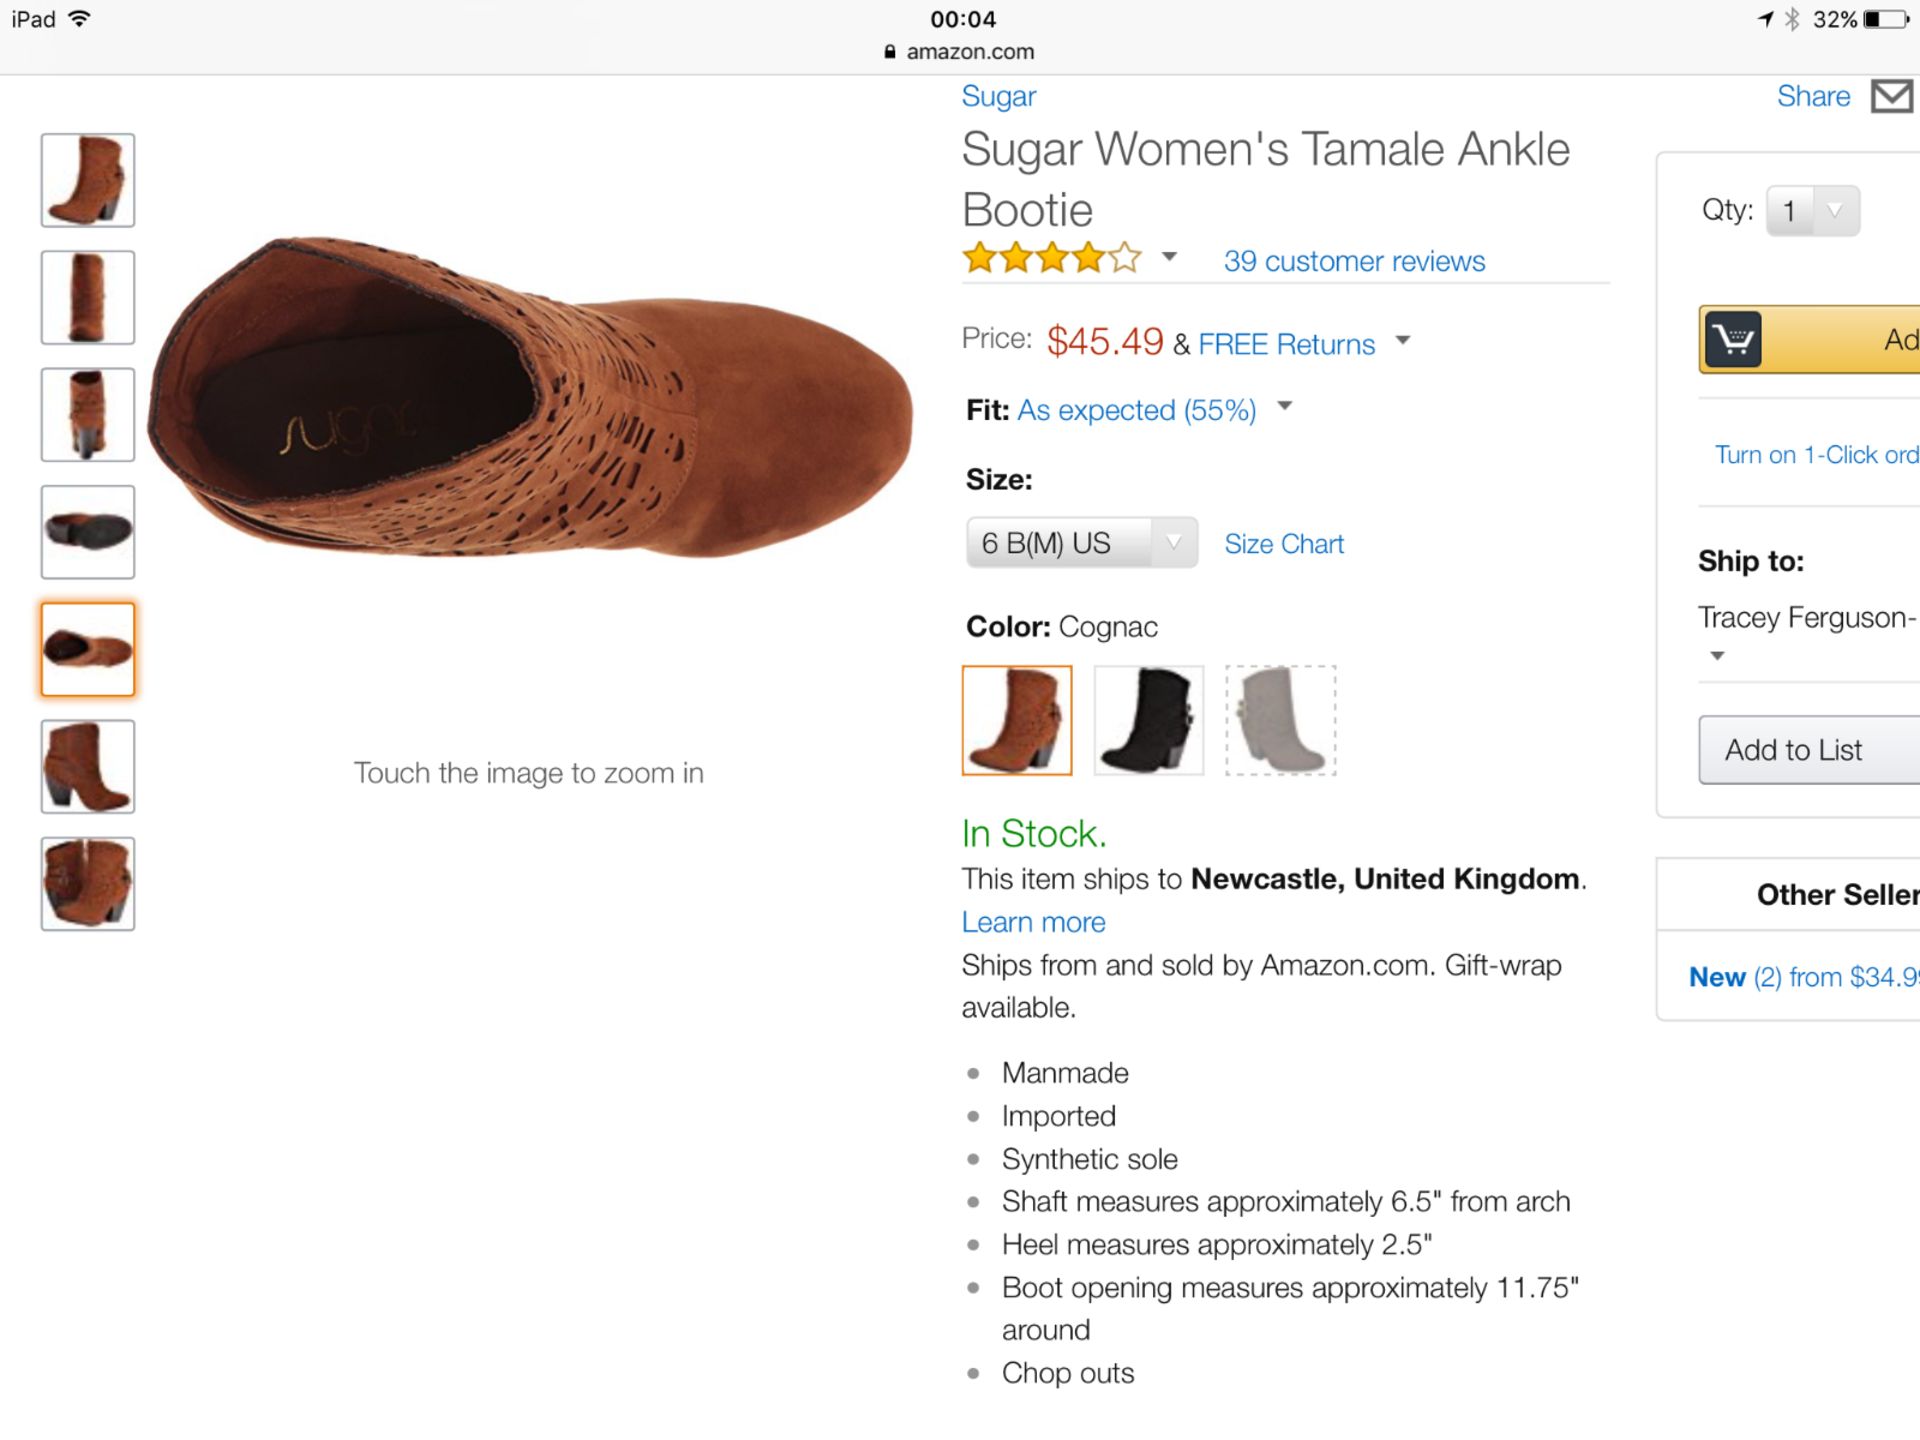 Sugar Women's Tamale Ankle Bootie, Size US Eur 36 UK 4 (New with box) [Ref: B-002] - Image 5 of 8